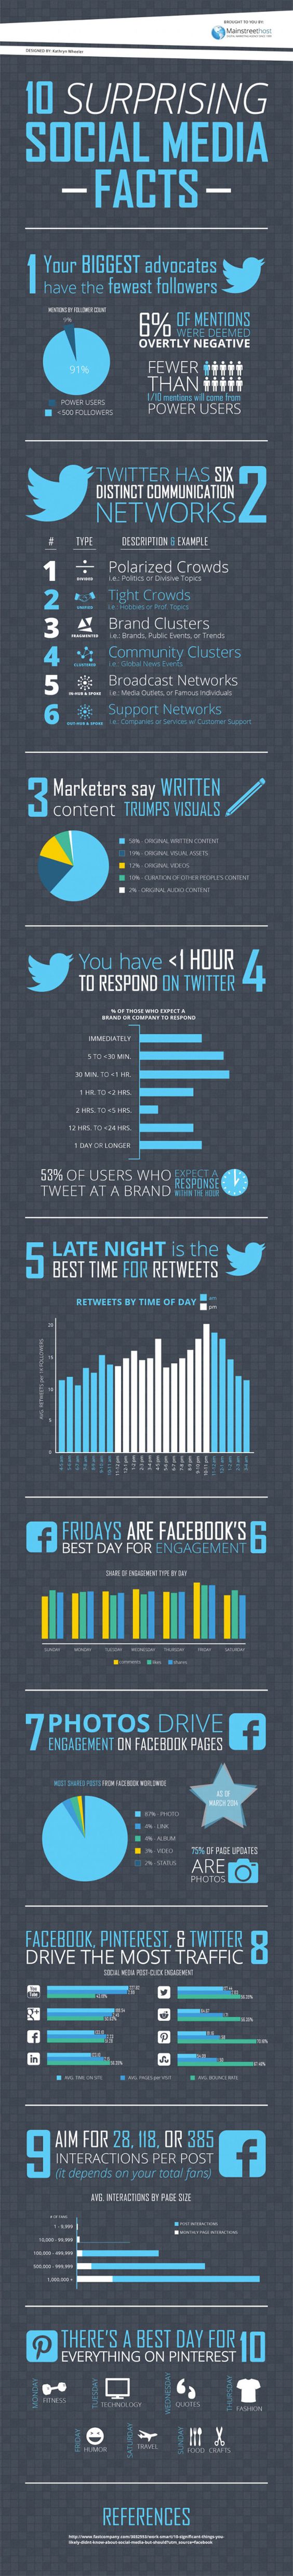 1 min read 10 Surprising Things You Should Know About #SocialMedia (#Infographic)